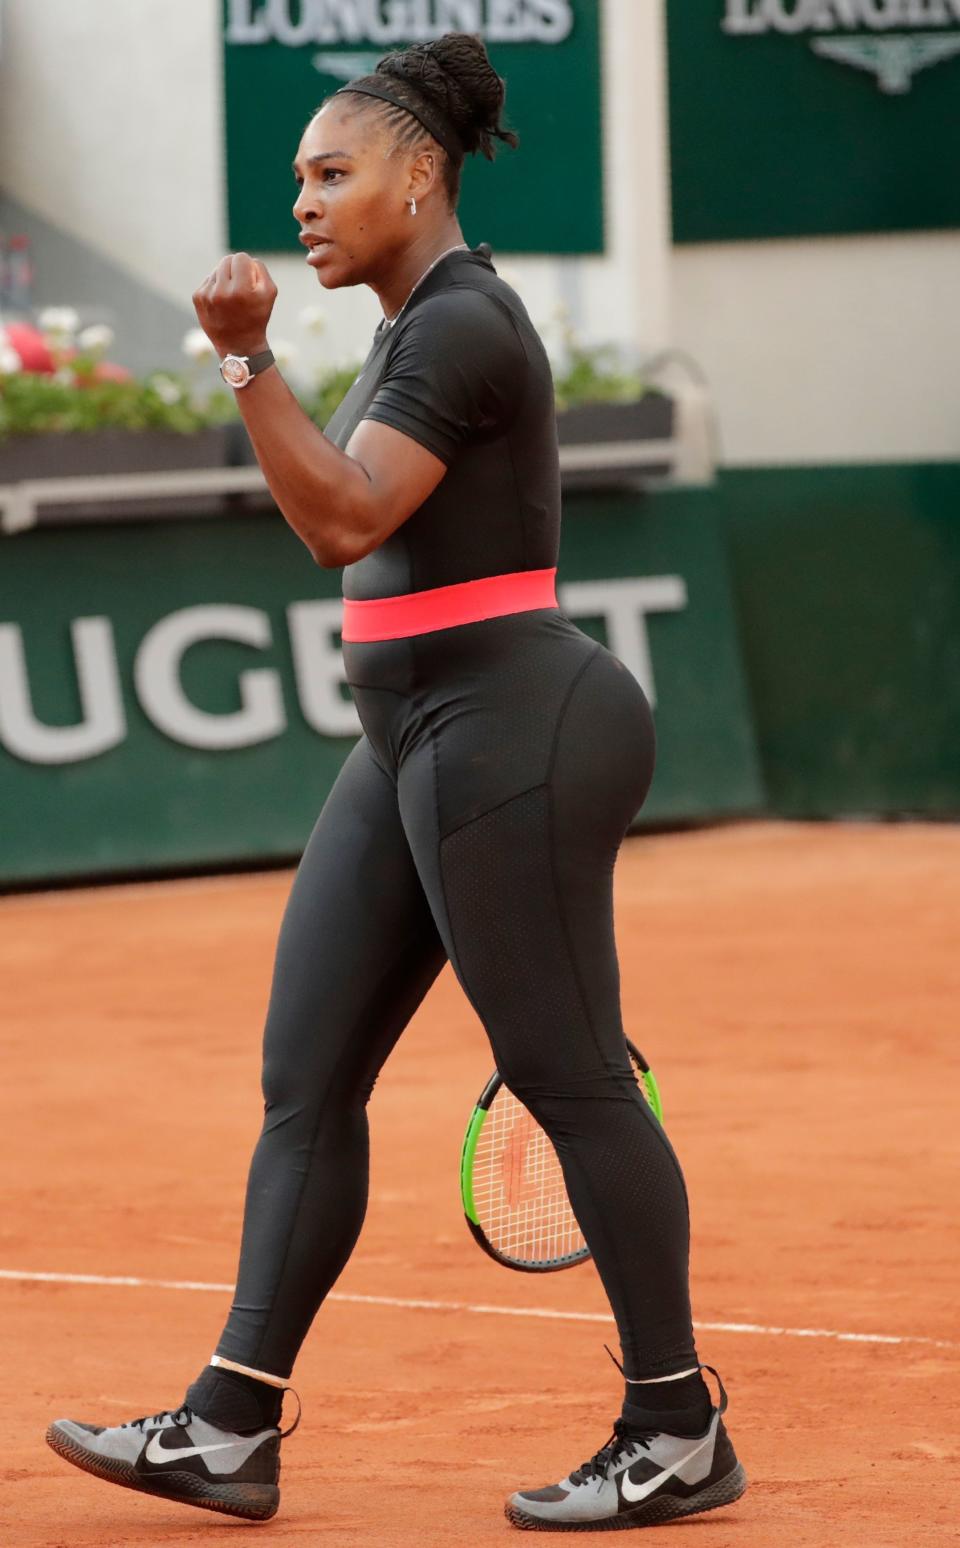 After Serena Williams wore a catsuit to the French Open, the president said the outfit is banned. Now, Nike has responded.